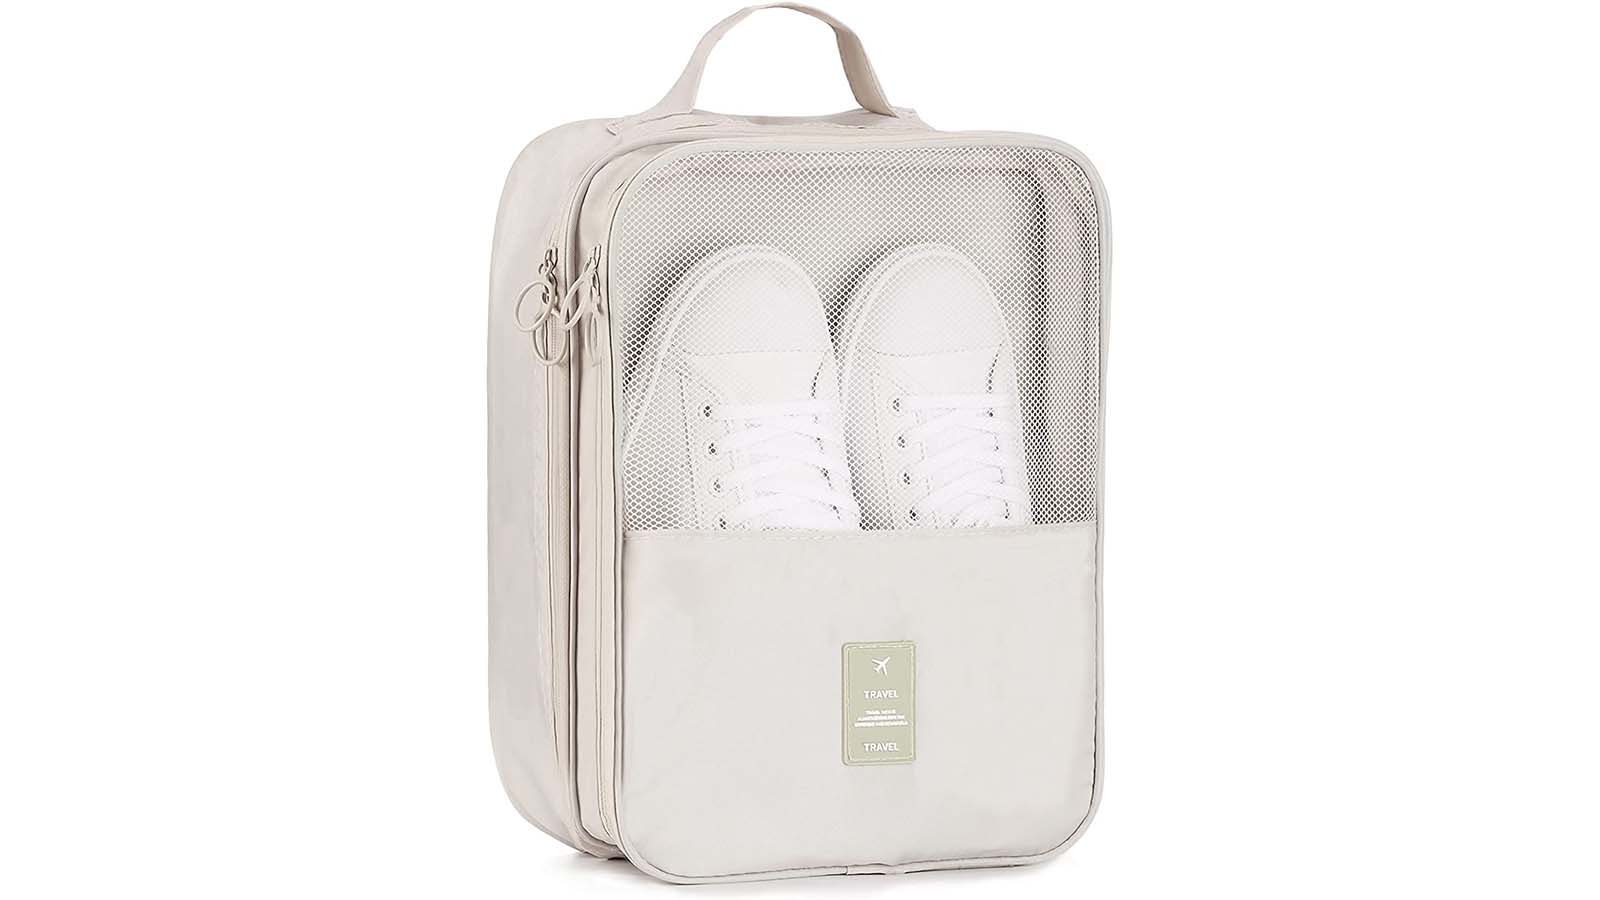 20 best travel shoe bags: Fast and organized packing